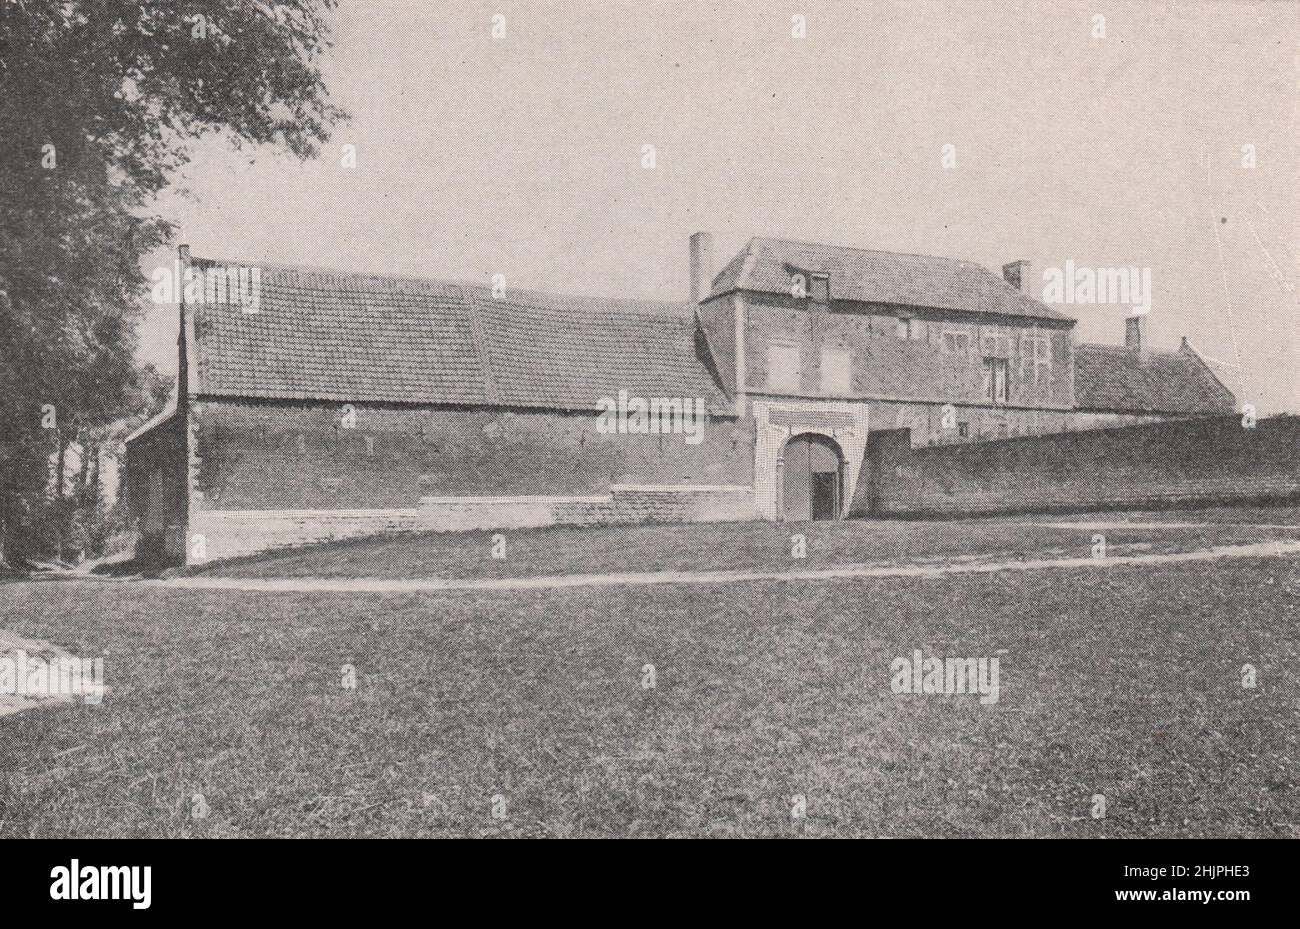 Hougoumont farm that in a day became immortal. Belgium (1923) Stock Photo